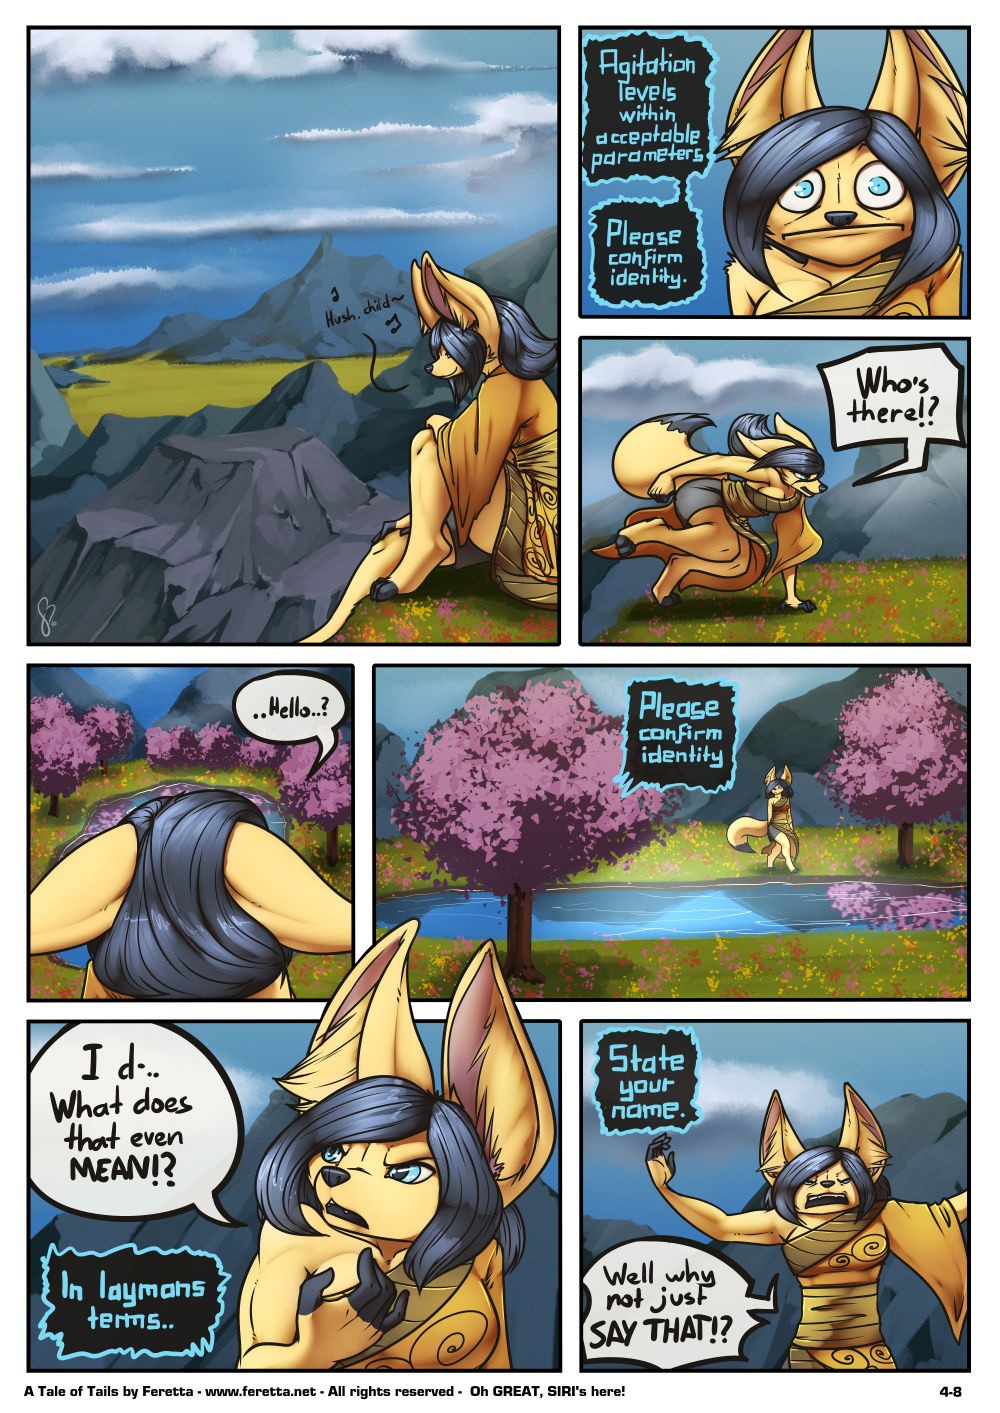 A Tale of Tails 4 - Matters of the mind porn comic picture 8